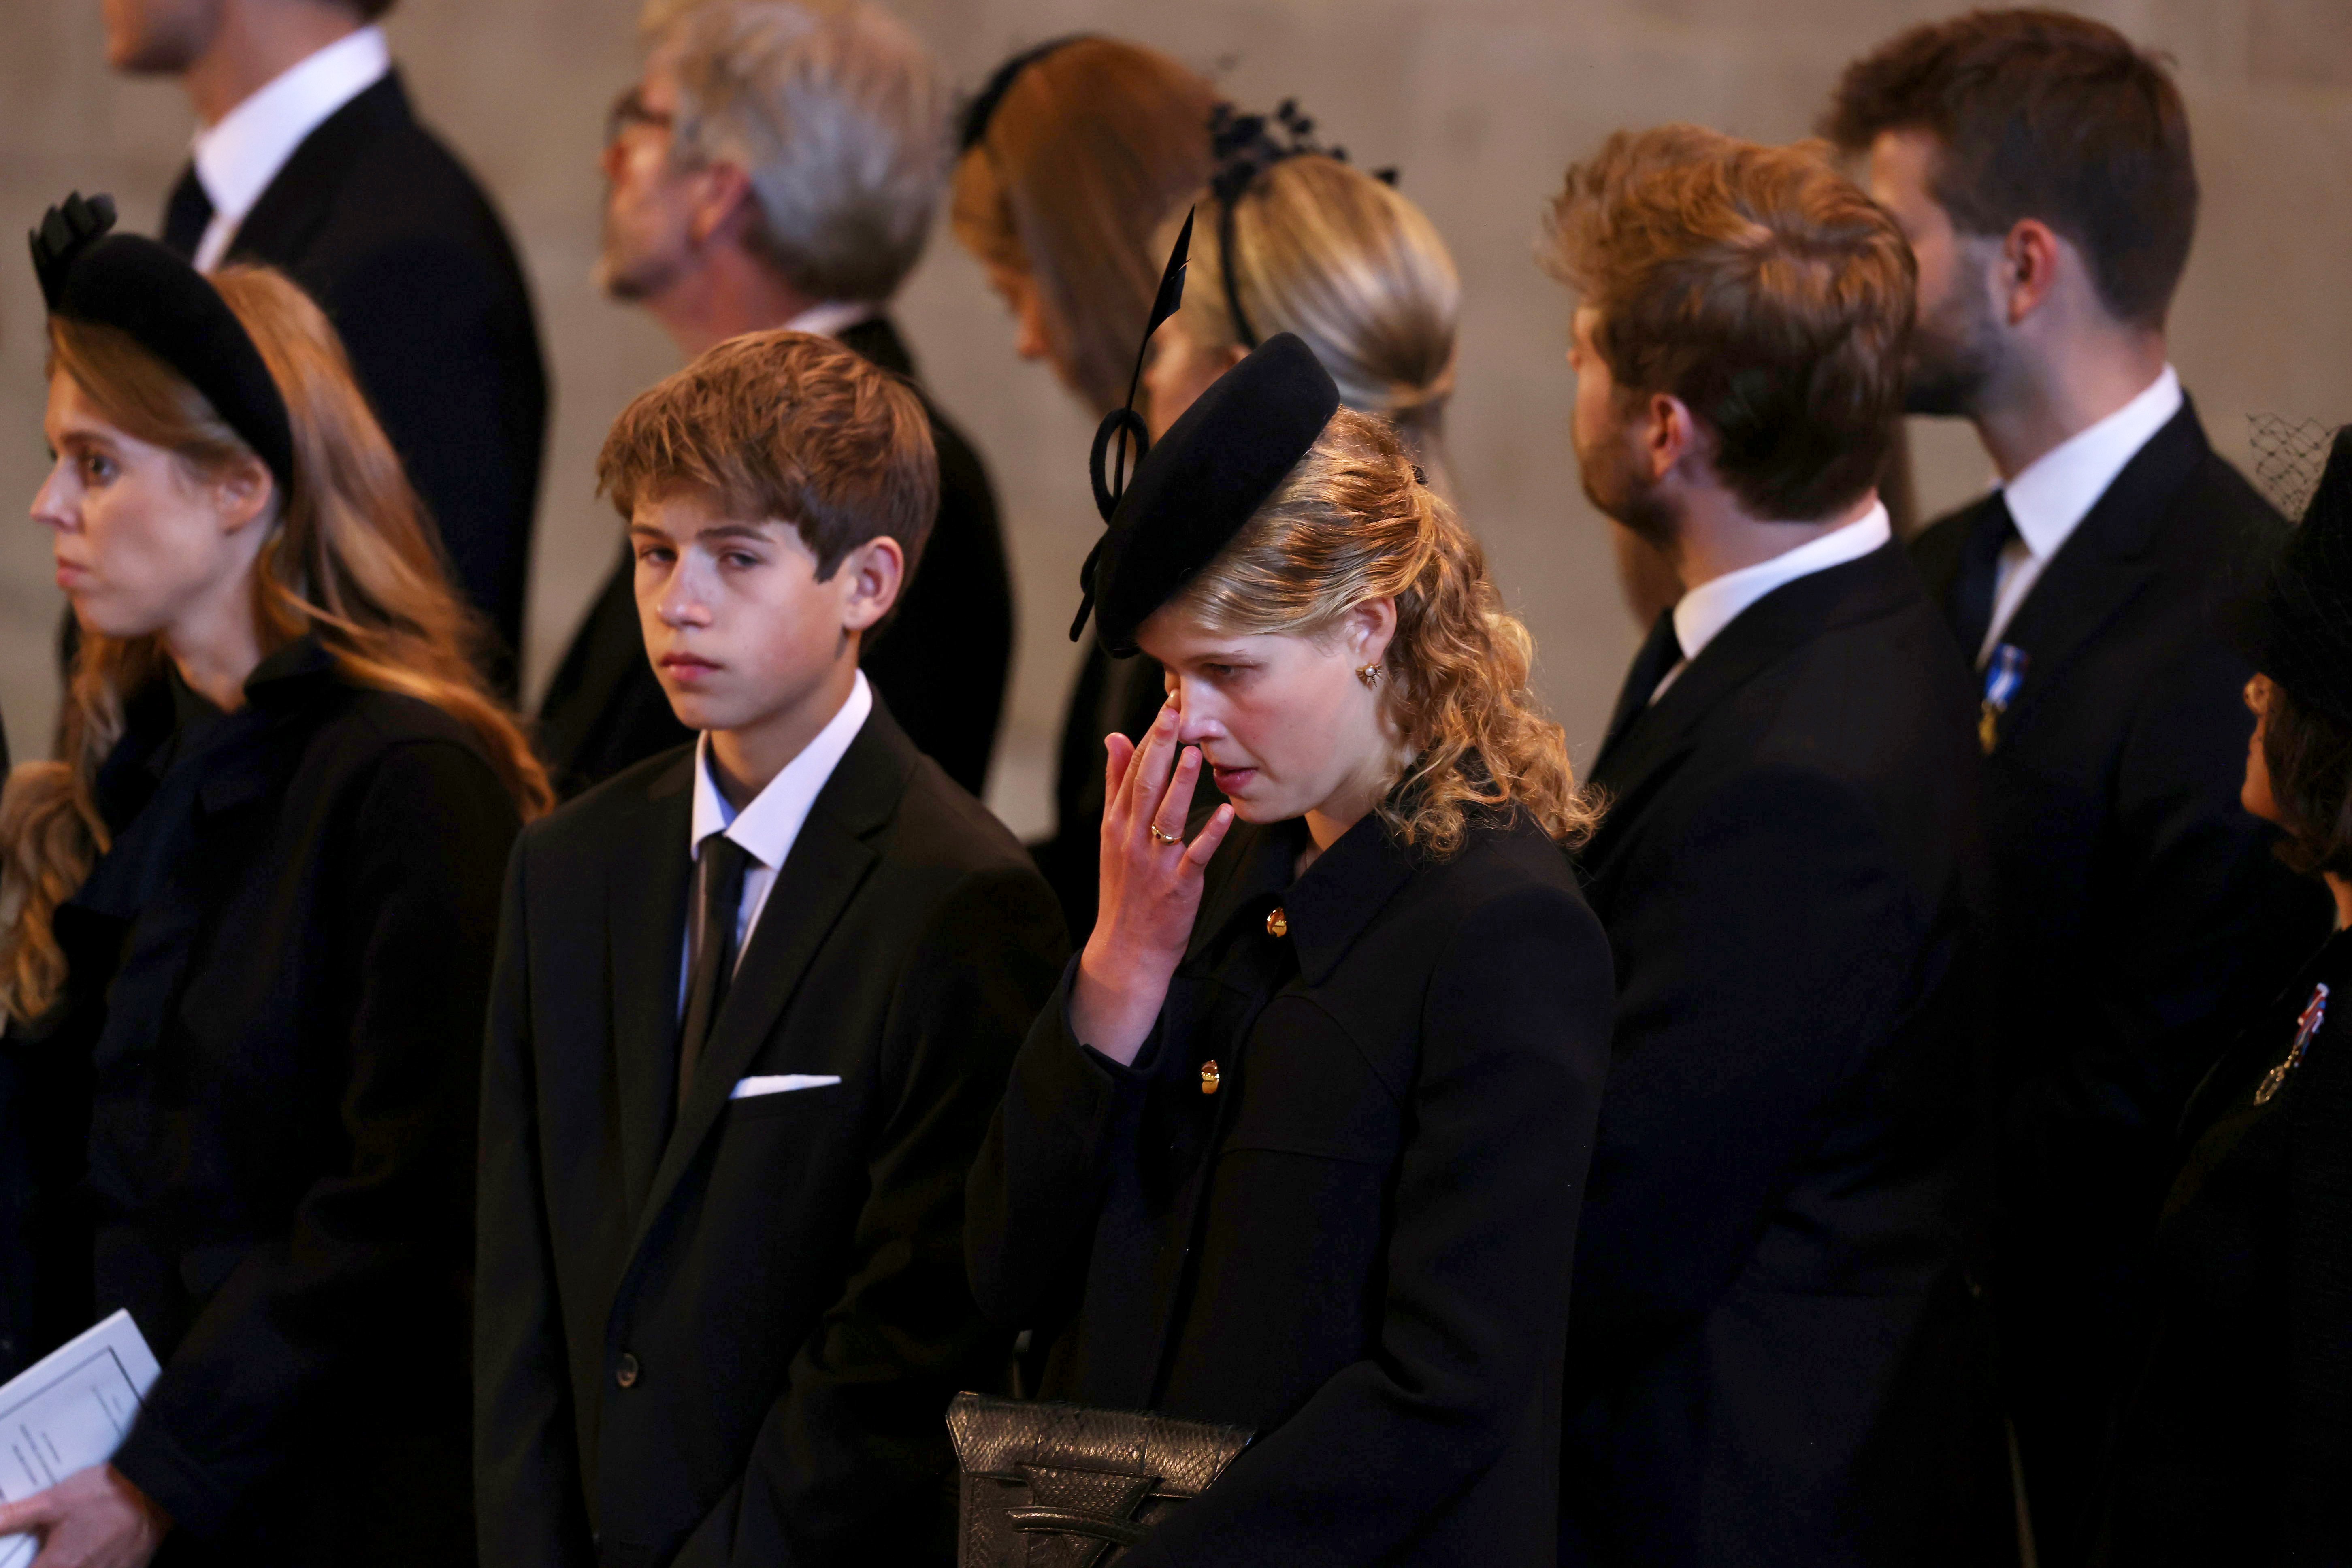 James, Viscount Severn and Lady Louise Windsor pay their respects during the procession for the Lying-in State of Queen Elizabeth II at Westminster Abbey on September 14, 2022 in London, United Kingdom | Source: Getty Images